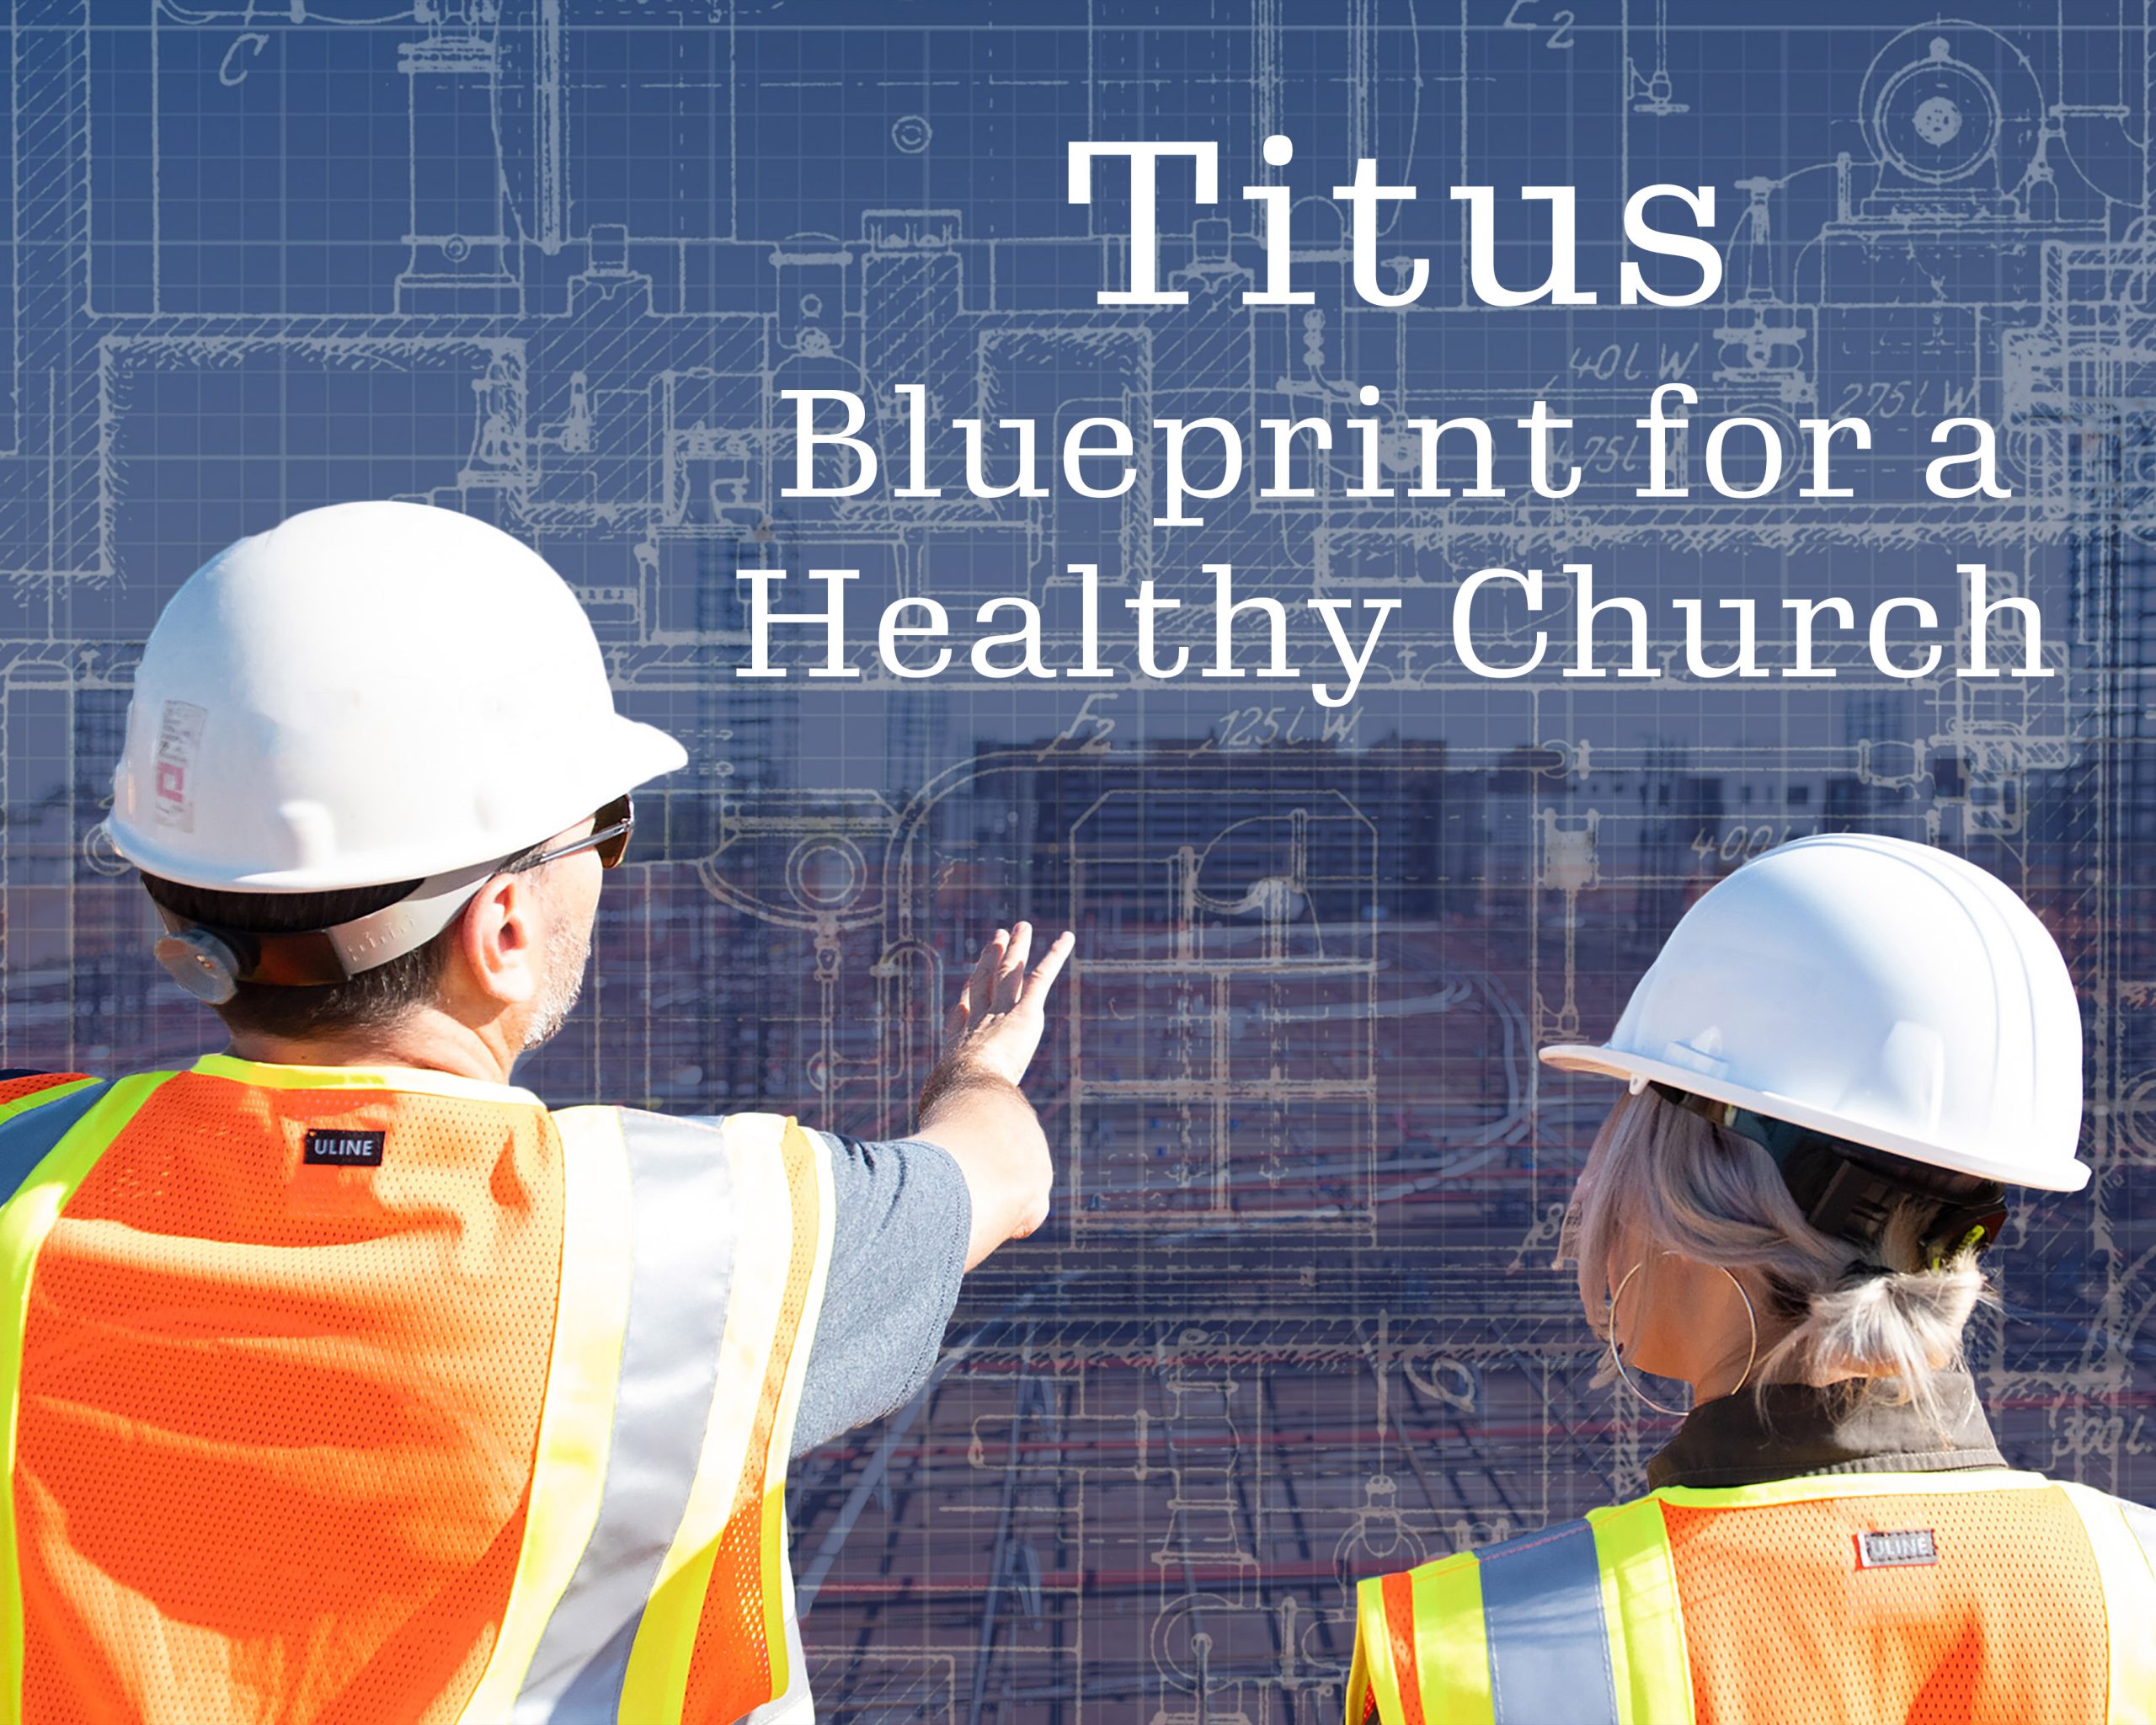 Titus Blueprint for a Healthy Church text overlay on photo of male and female construction workers overlooking a job site.